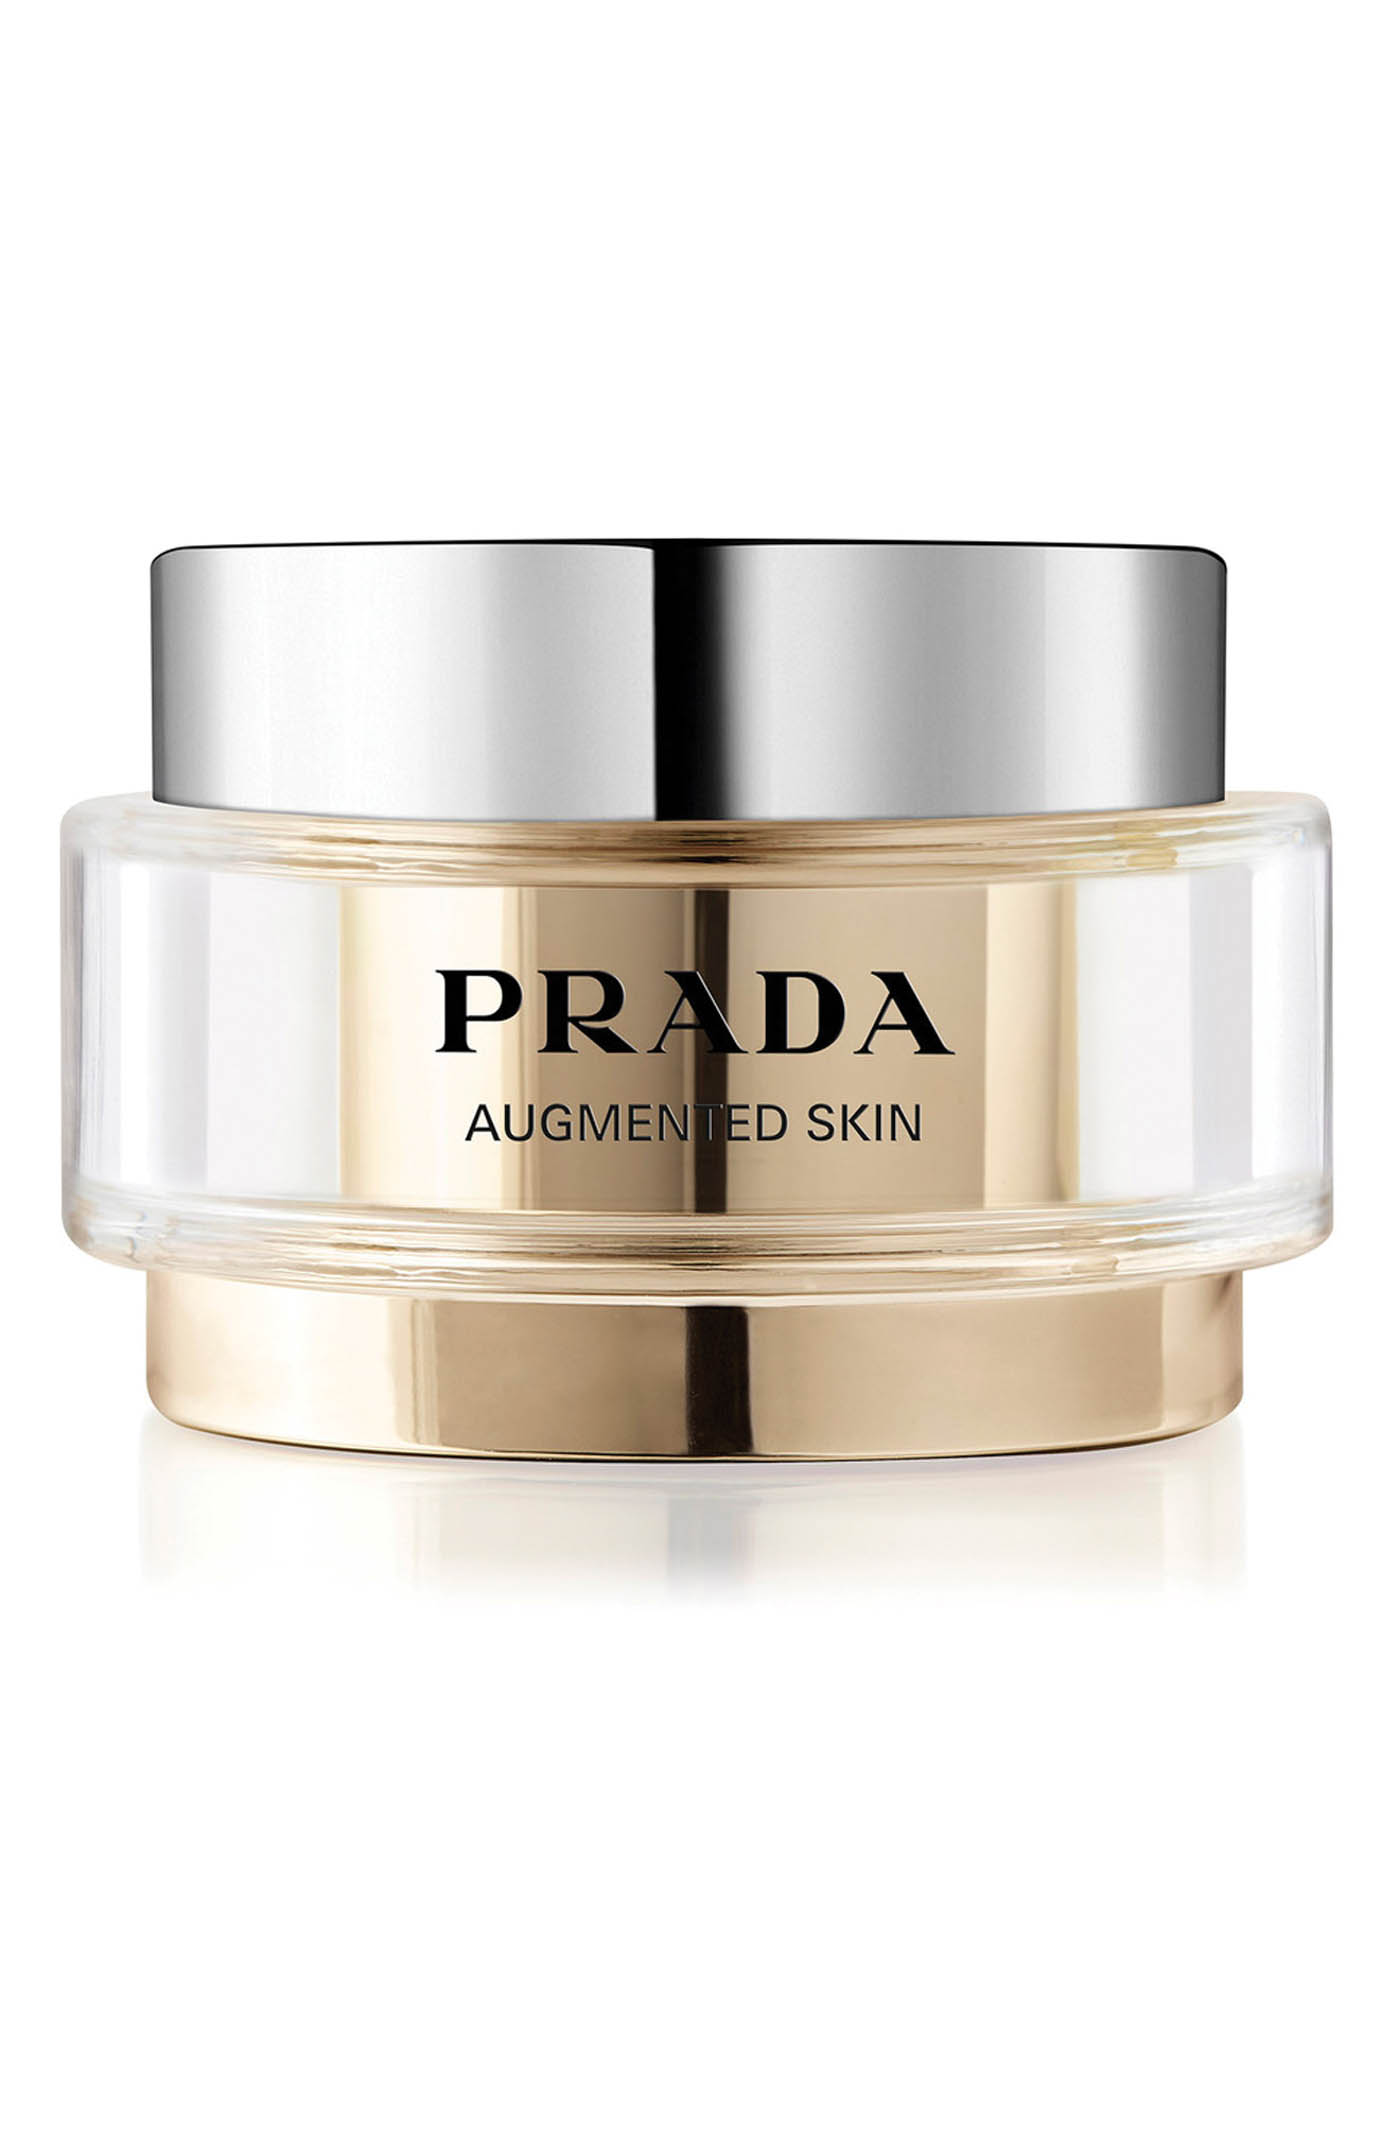 26 Trying Prada's Newly Launched Augmented Skin Cream, Nordstrom.com